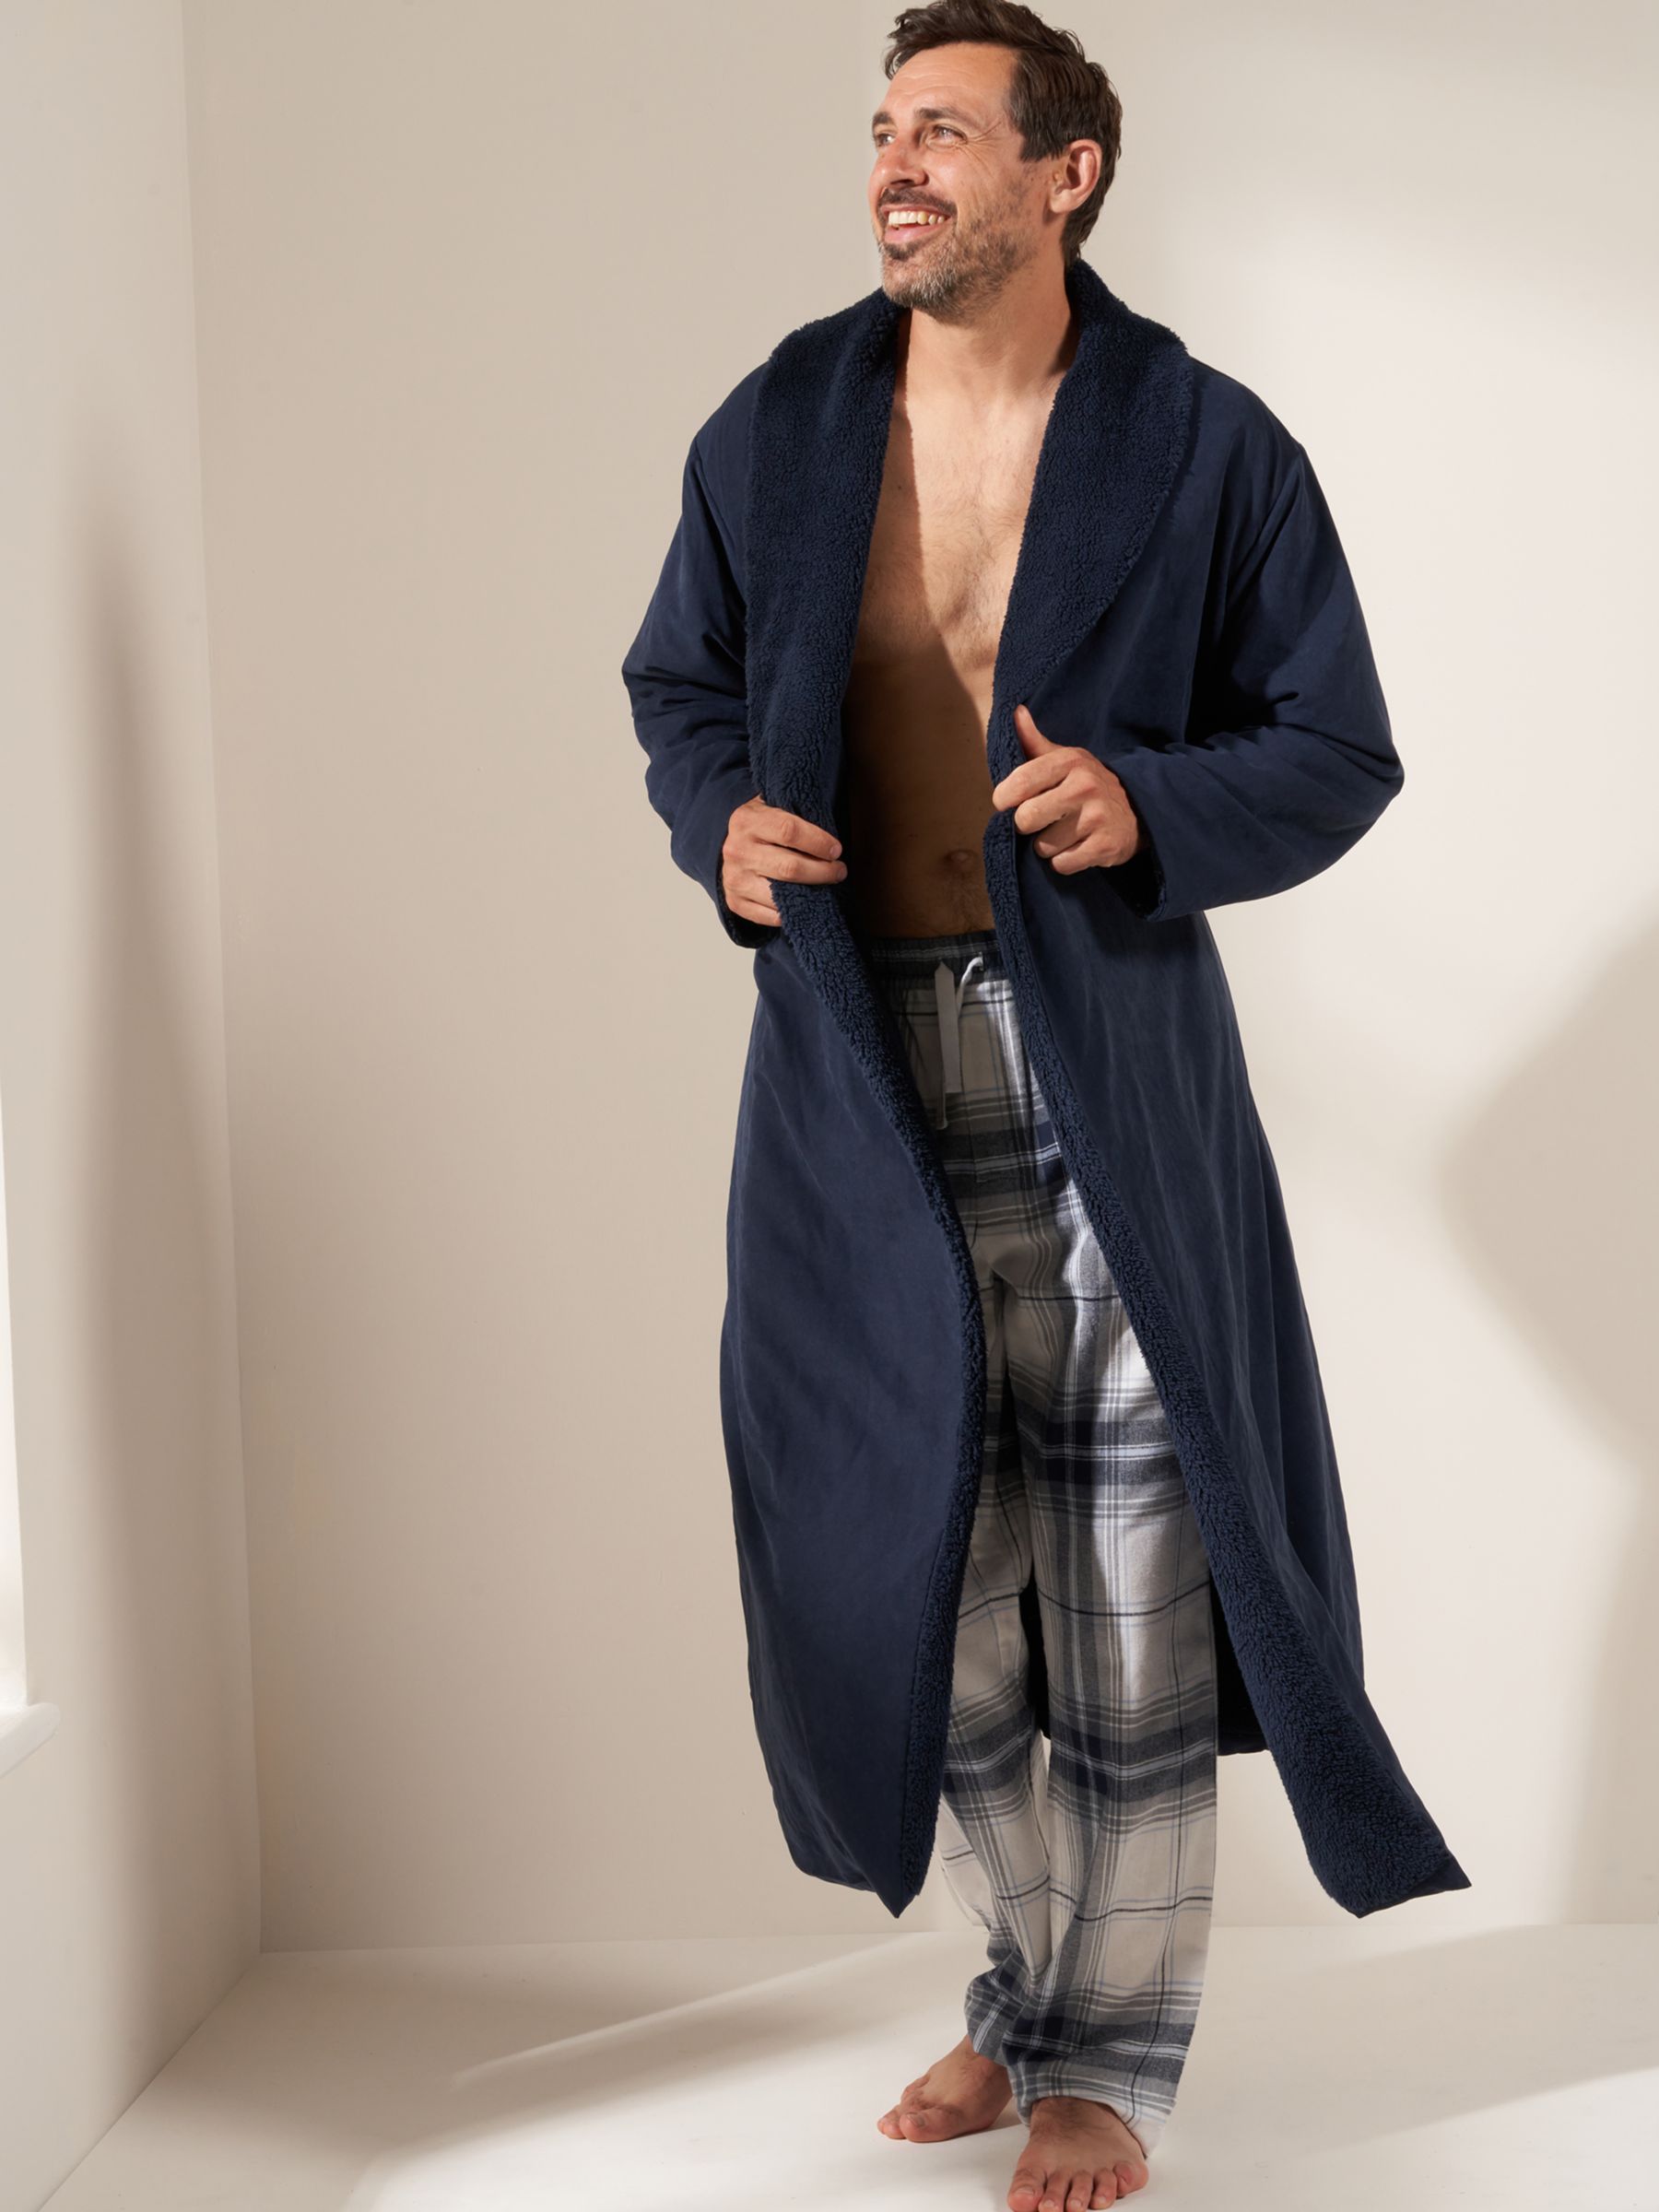 Truly Fleece Lined Dressing Gown, Midnight, S-M